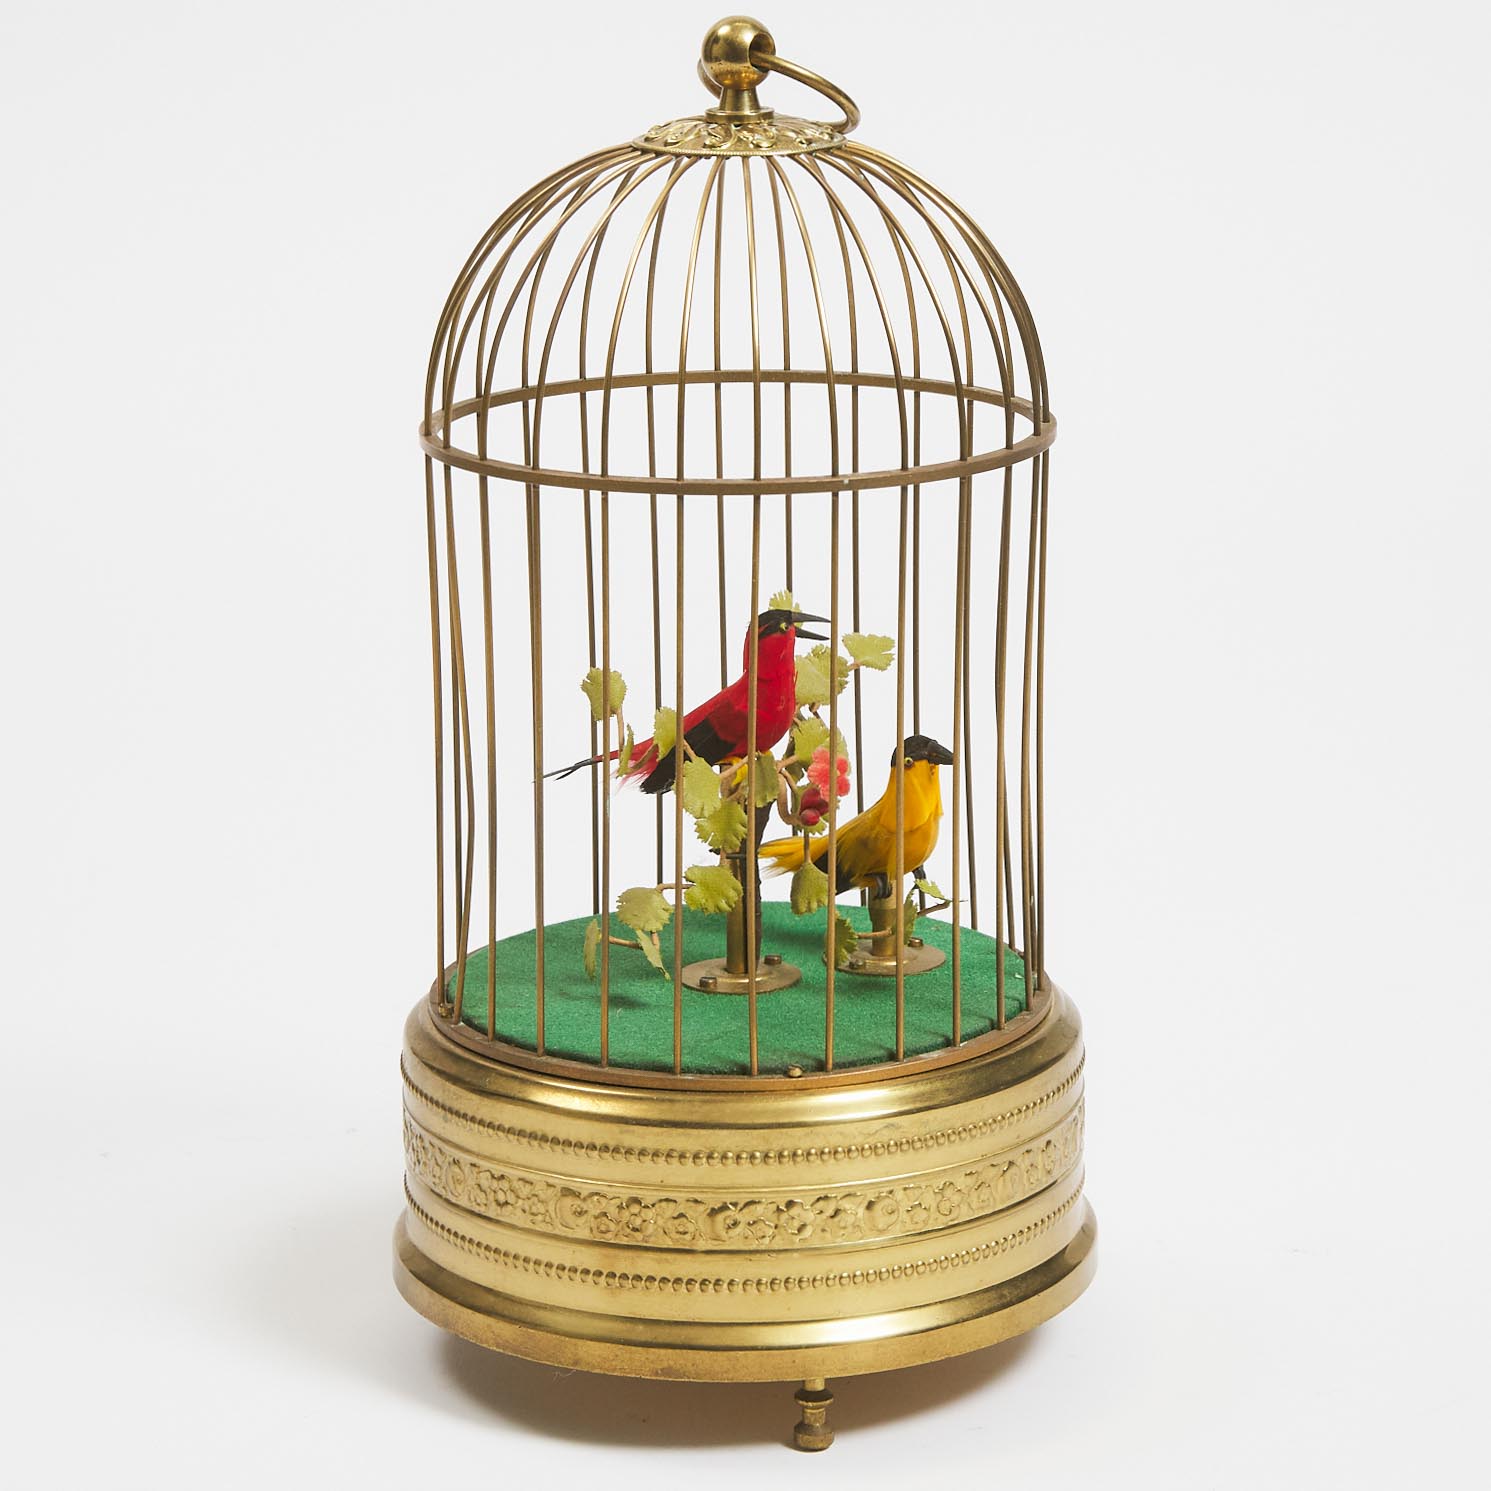 German Automaton Singing Birds in a Cage, Karl Griesbuam, mid 20th century